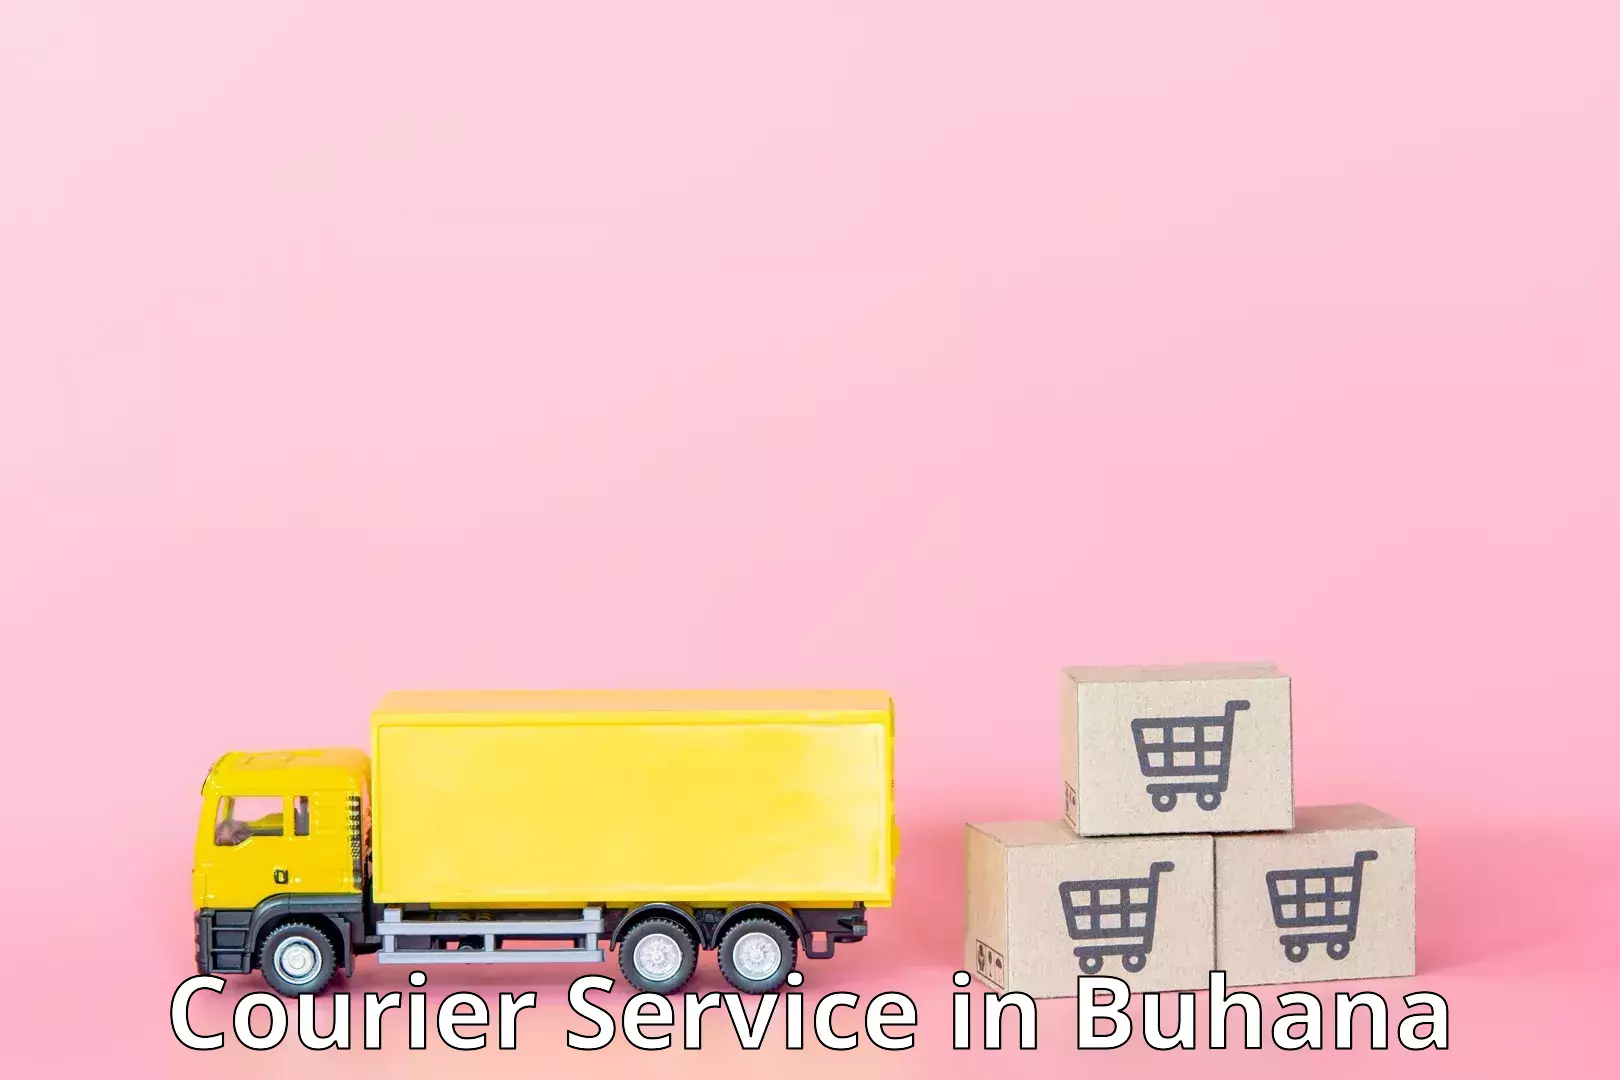 Tailored delivery services in Buhana